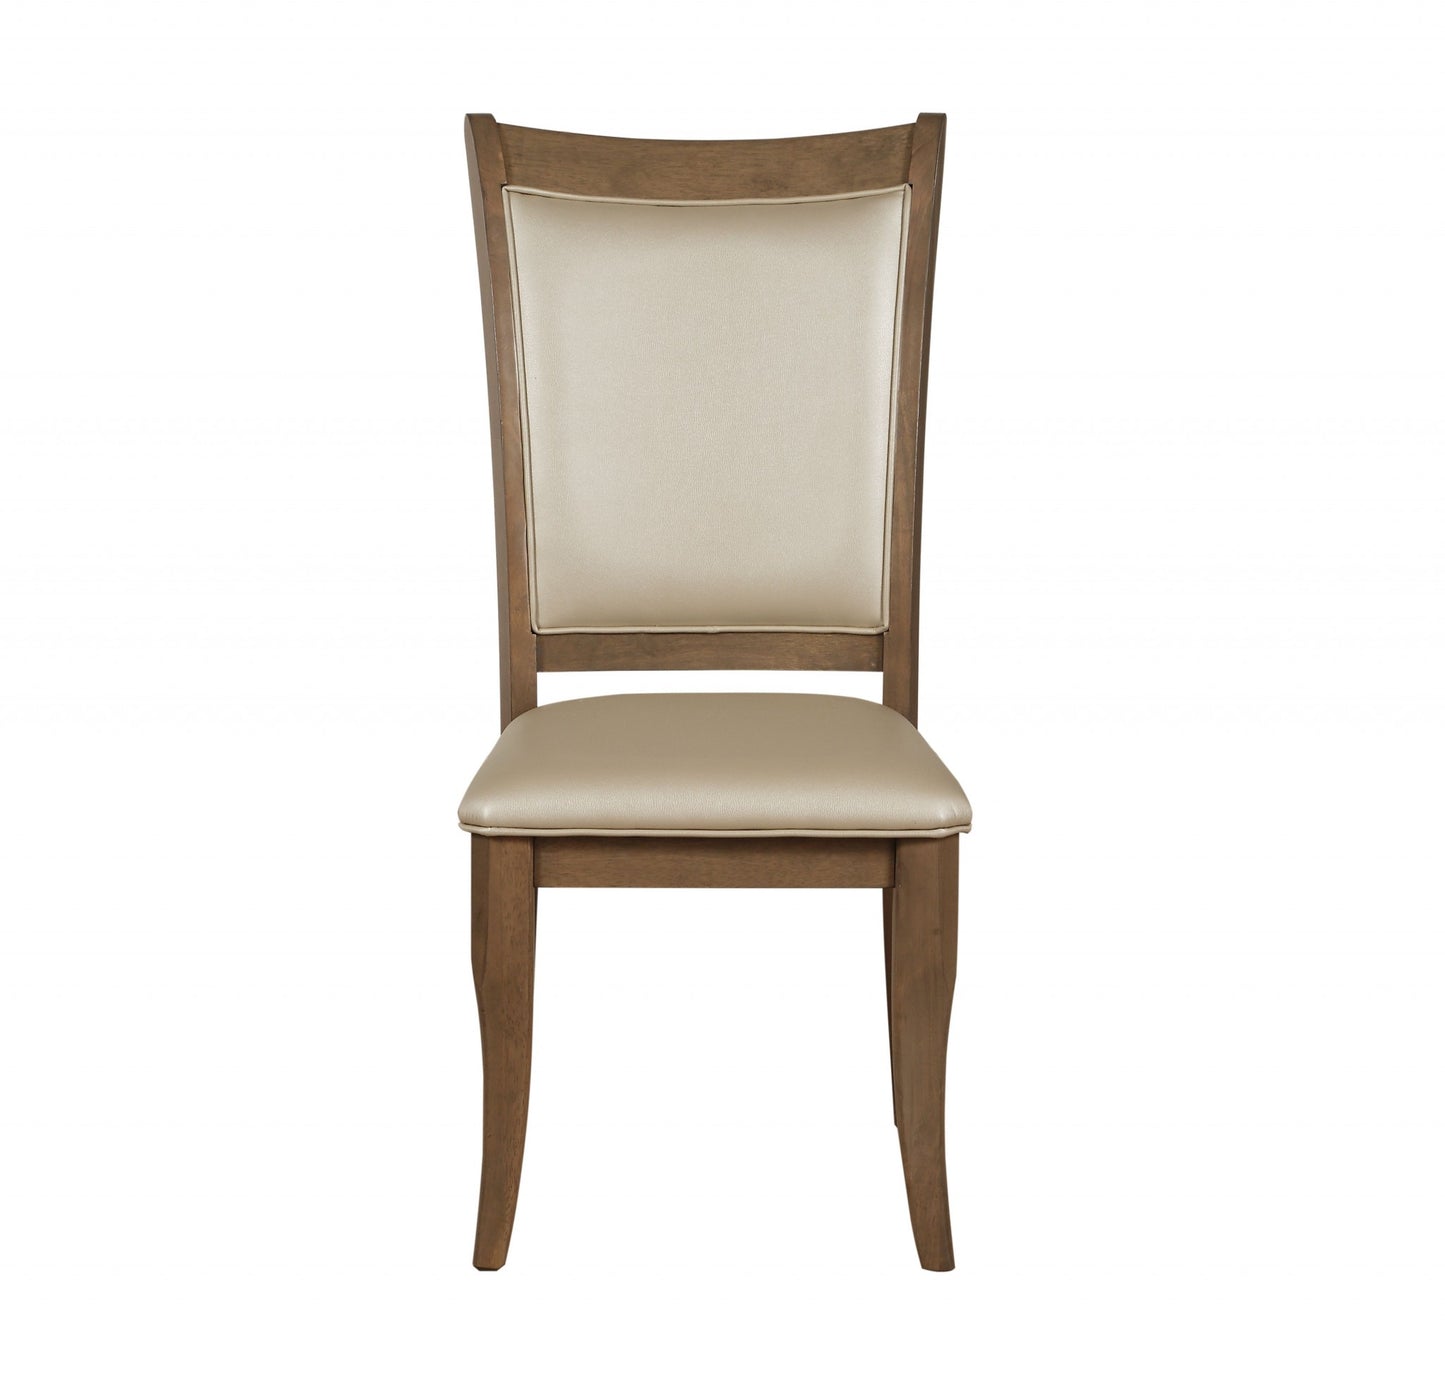 Set of Two Beige And Brown Upholstered Faux Leather Open Back Dining Side Chairs